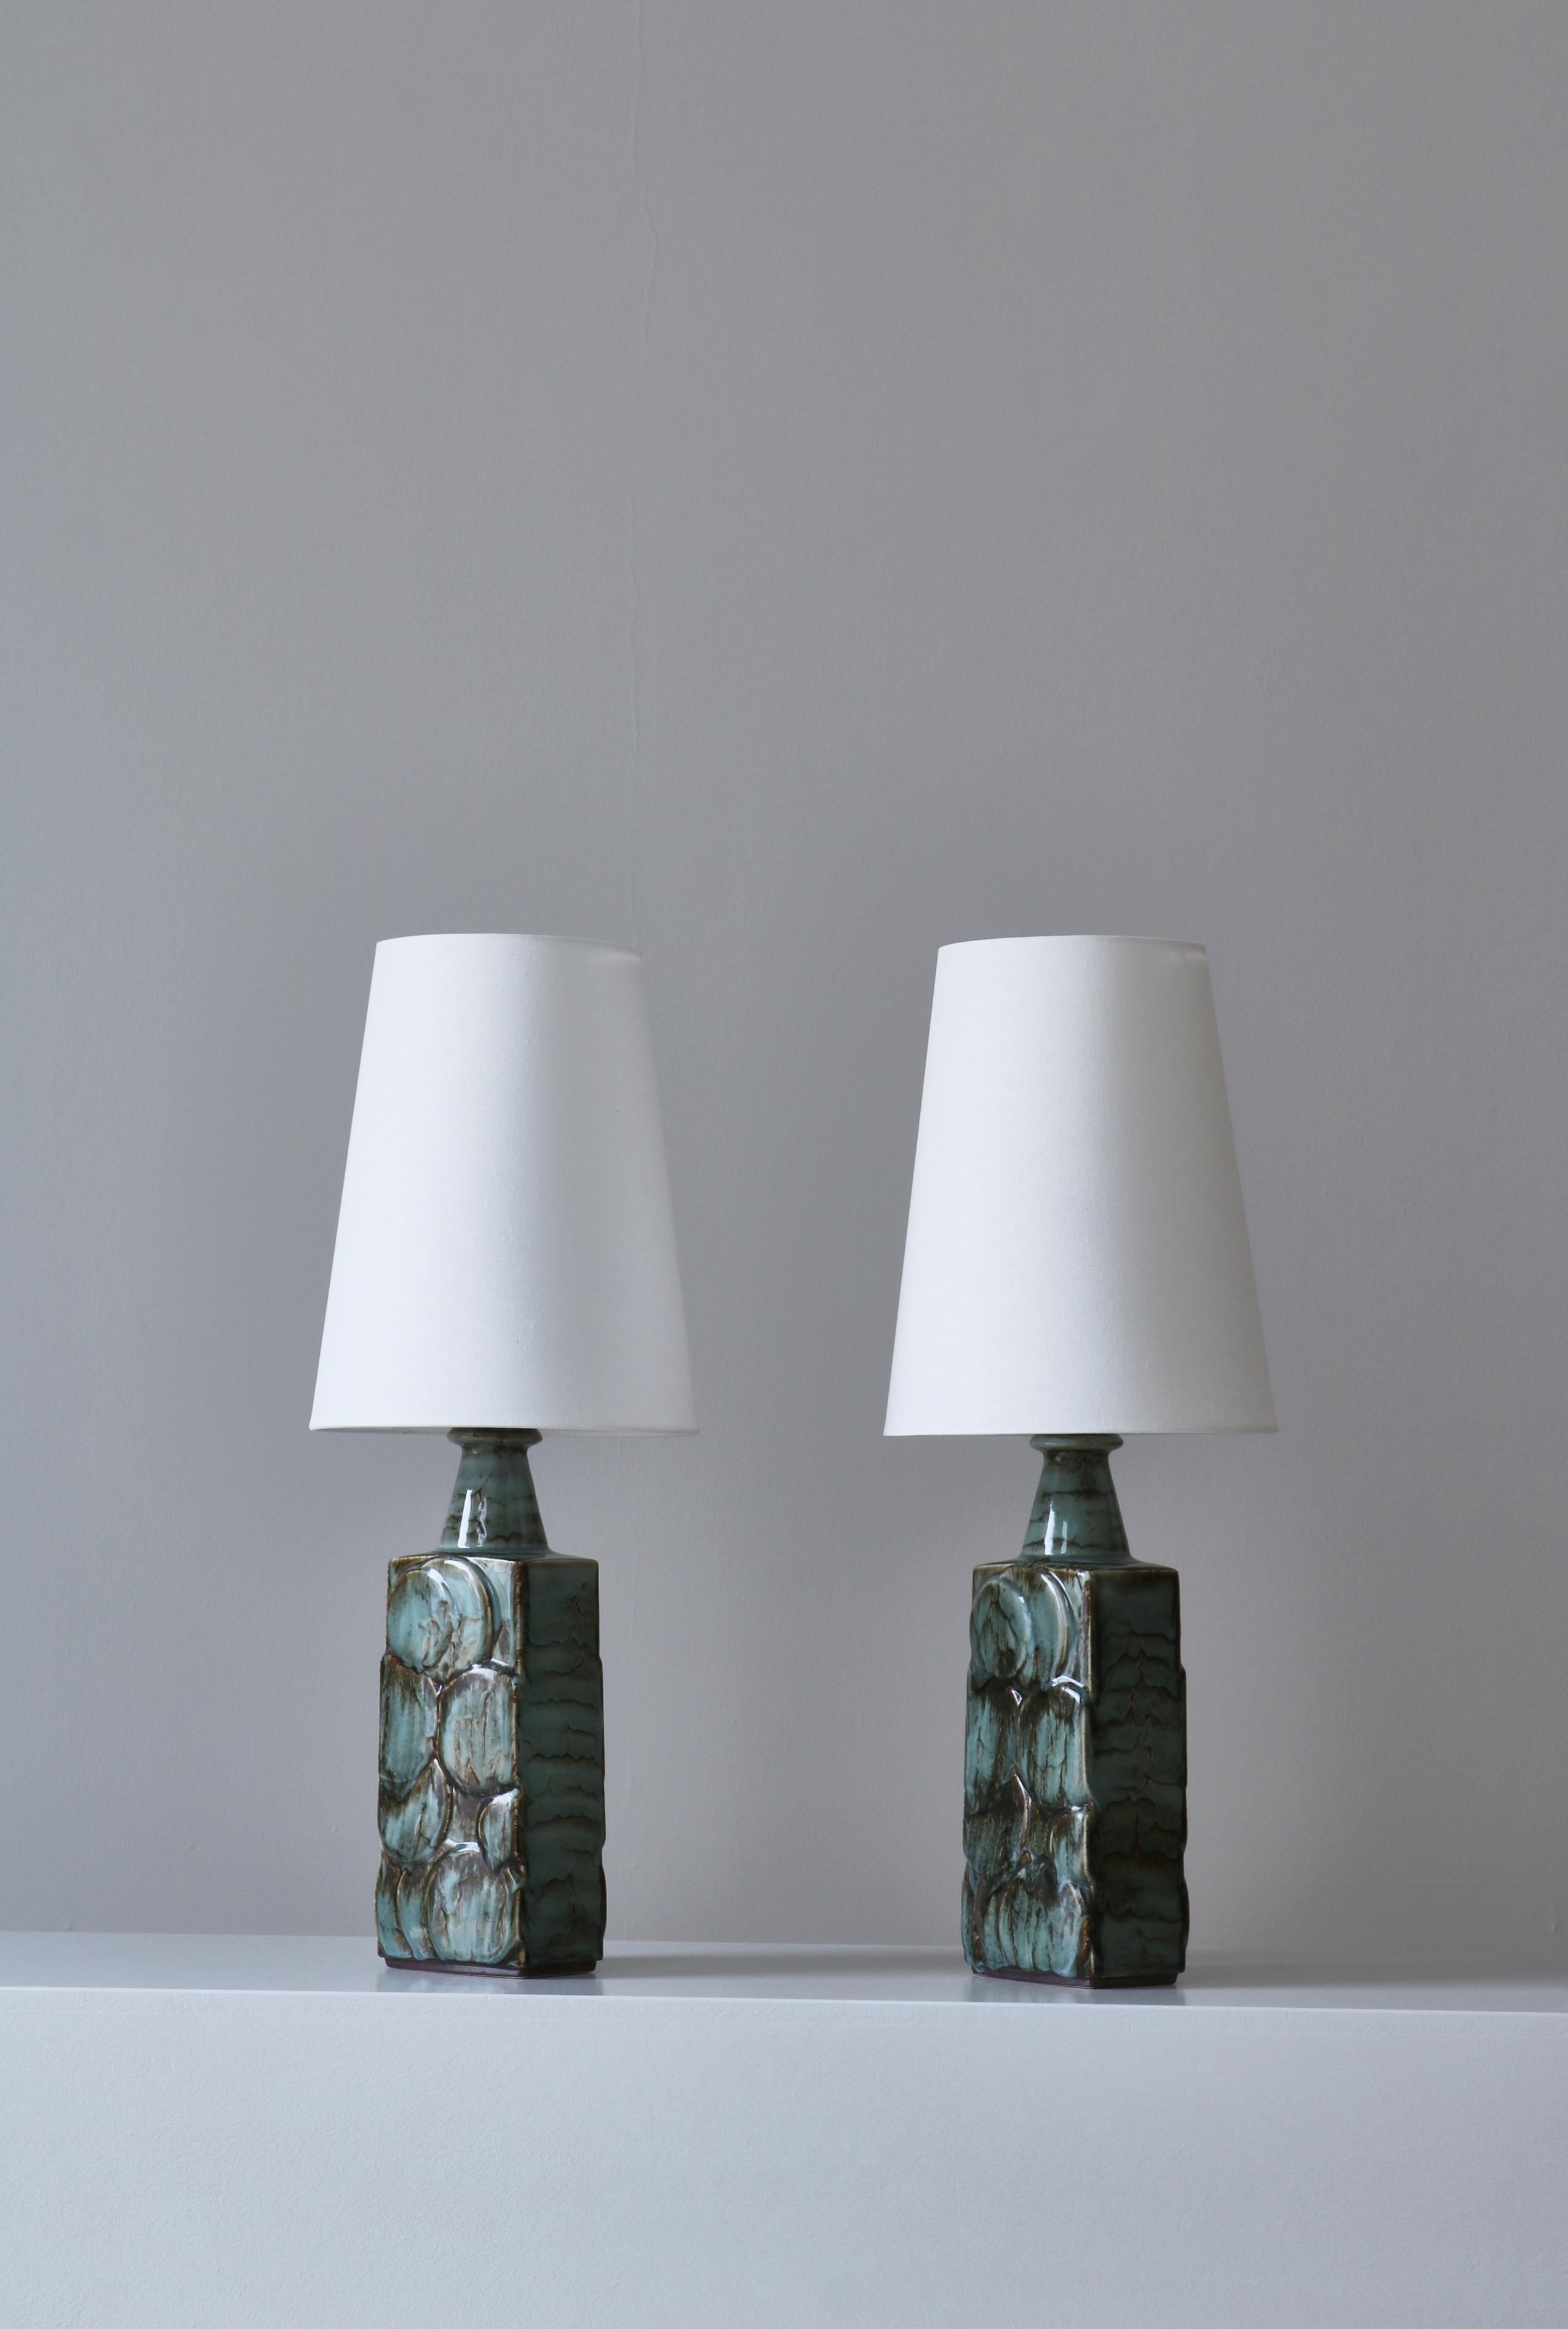 A wonderful pair of Scandinavian Modern unique table lamps made at Désirée stoneware workshop in Copenhagen in the 1960s. The lamp bases are handmade in relief decor with an amazing expressive glazing. Both lamps are signed. Equipped with white flax